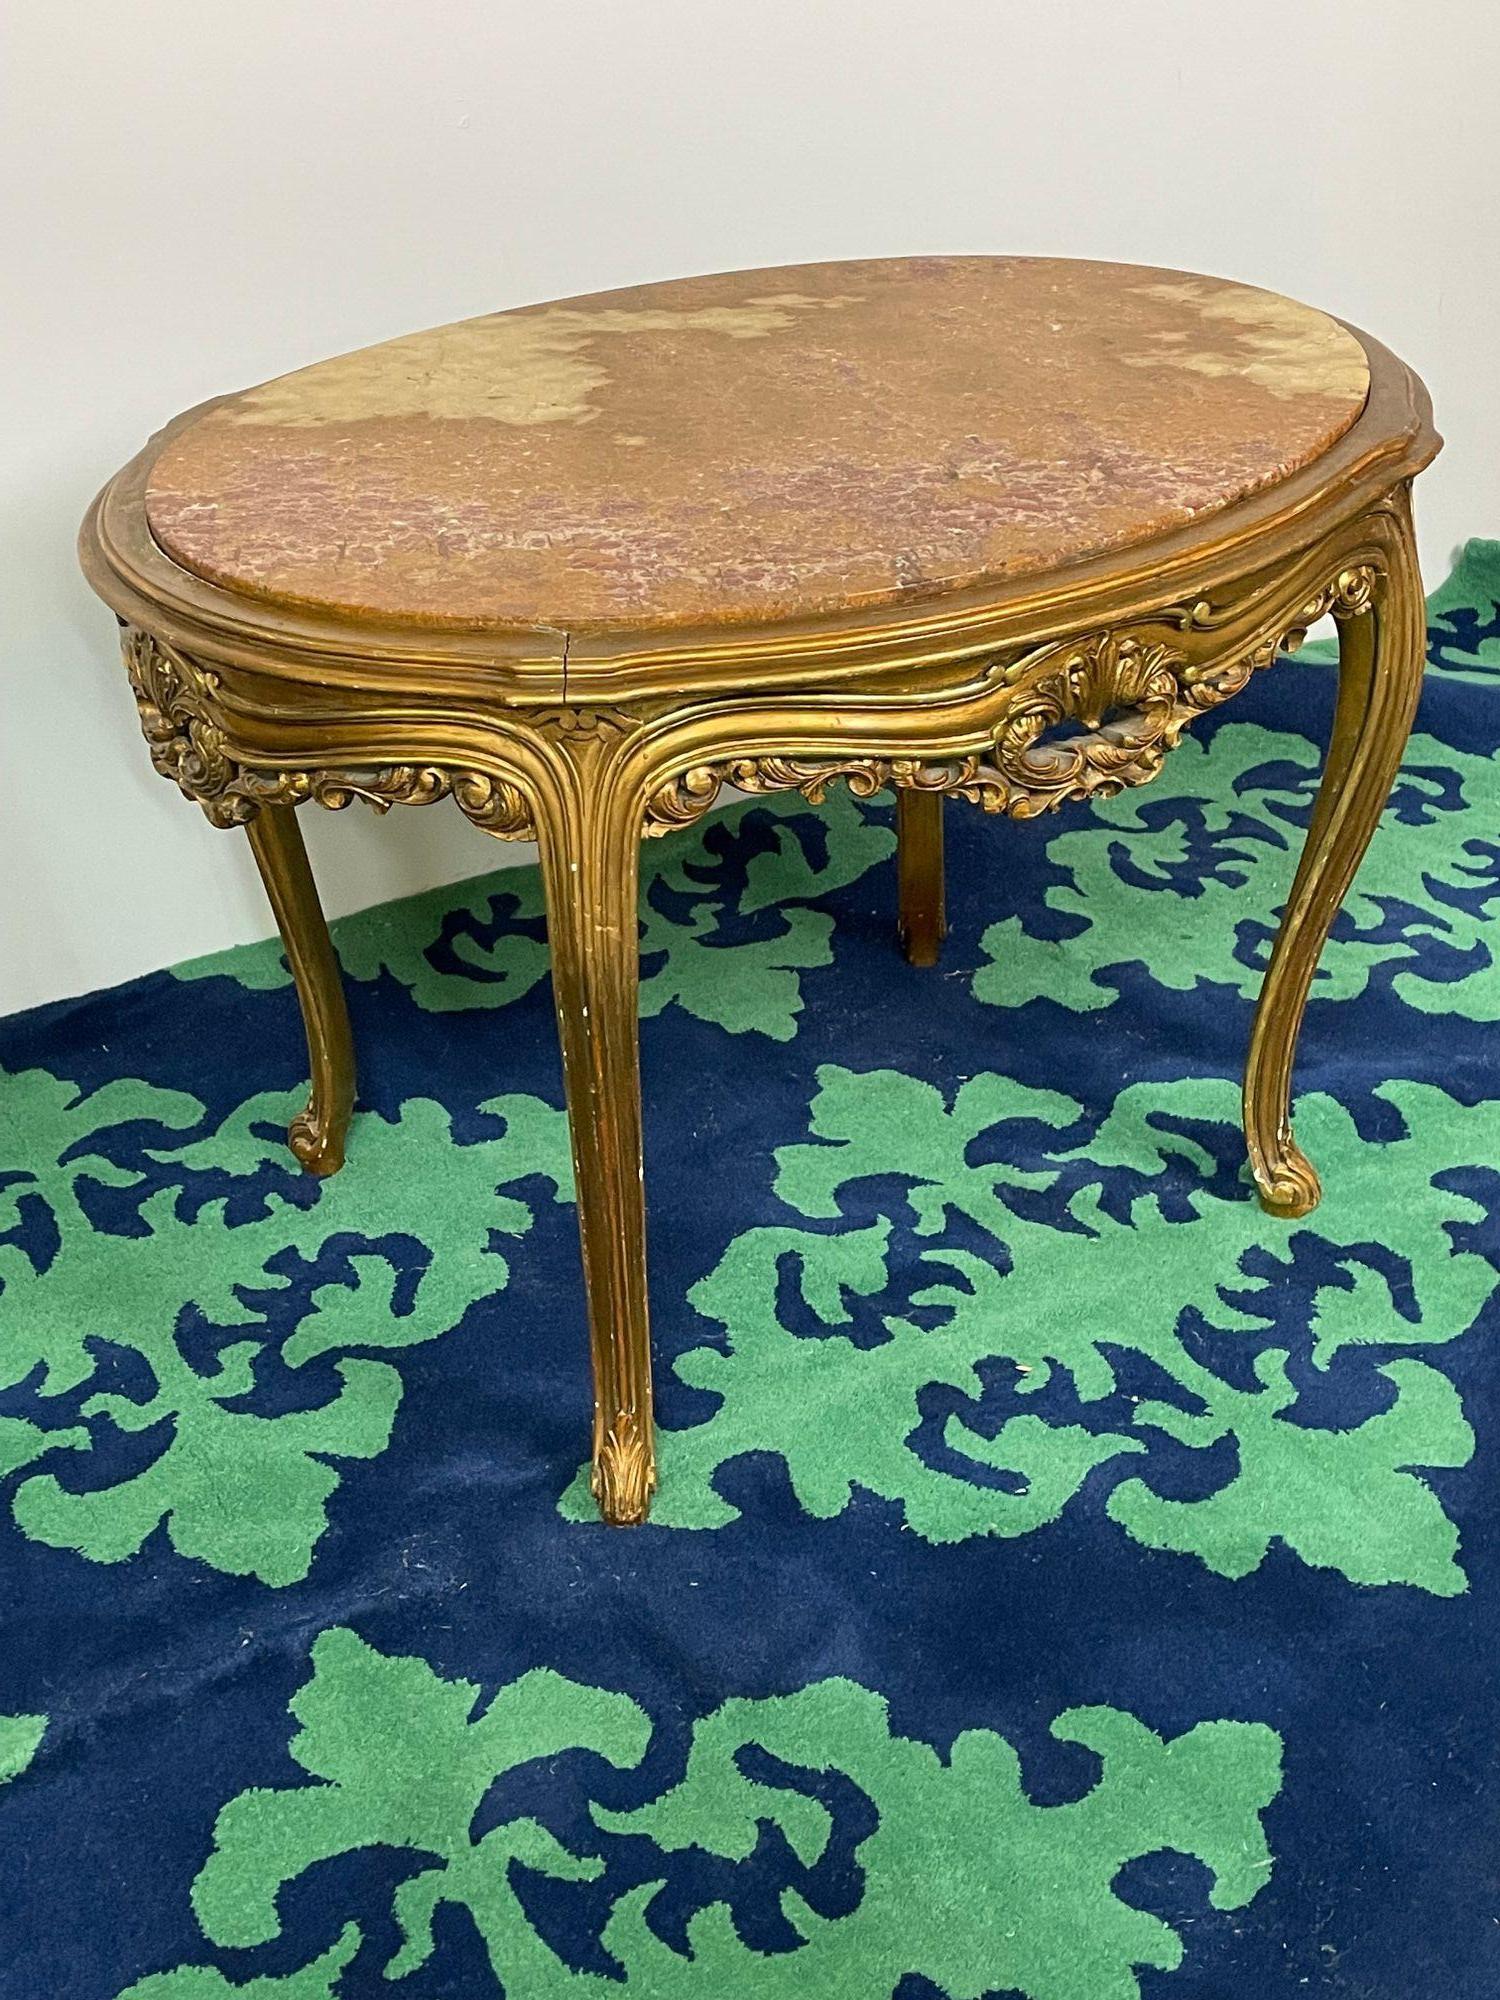 Louis XV Style French Center, End Table, Giltwood, Marble Top
A giltwood center or side table in the Louis XV style.  Excellent scale for a vestibule or foyer, the slender and refined giltwood legs and turned feet support a carved apron and a